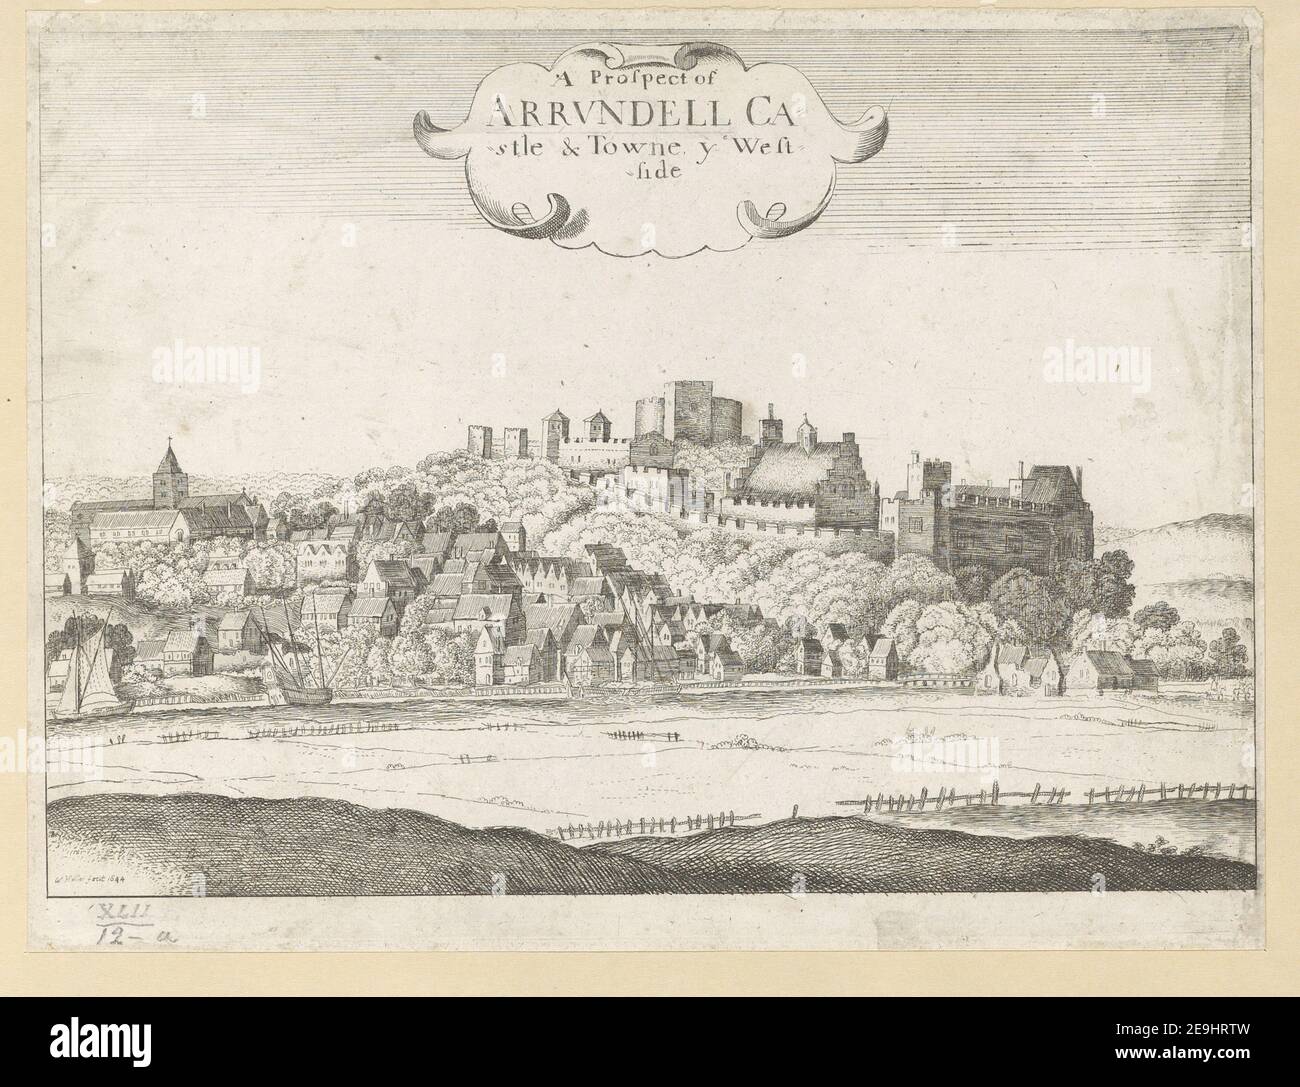 A Prospect of ARRVNDELL CA stle & Towne ye West  side.  Author  Hollar, Wenceslaus 42.12.a. Place of publication: [unknown place of publication] Publisher: [unknown publisher] Date of publication: [1644.]  Item type: 1 print Medium: etching Dimensions: sheet 18.0 x 23.6 cm [trimmed within platemark]  Former owner: George III, King of Great Britain, 1738-1820 Stock Photo